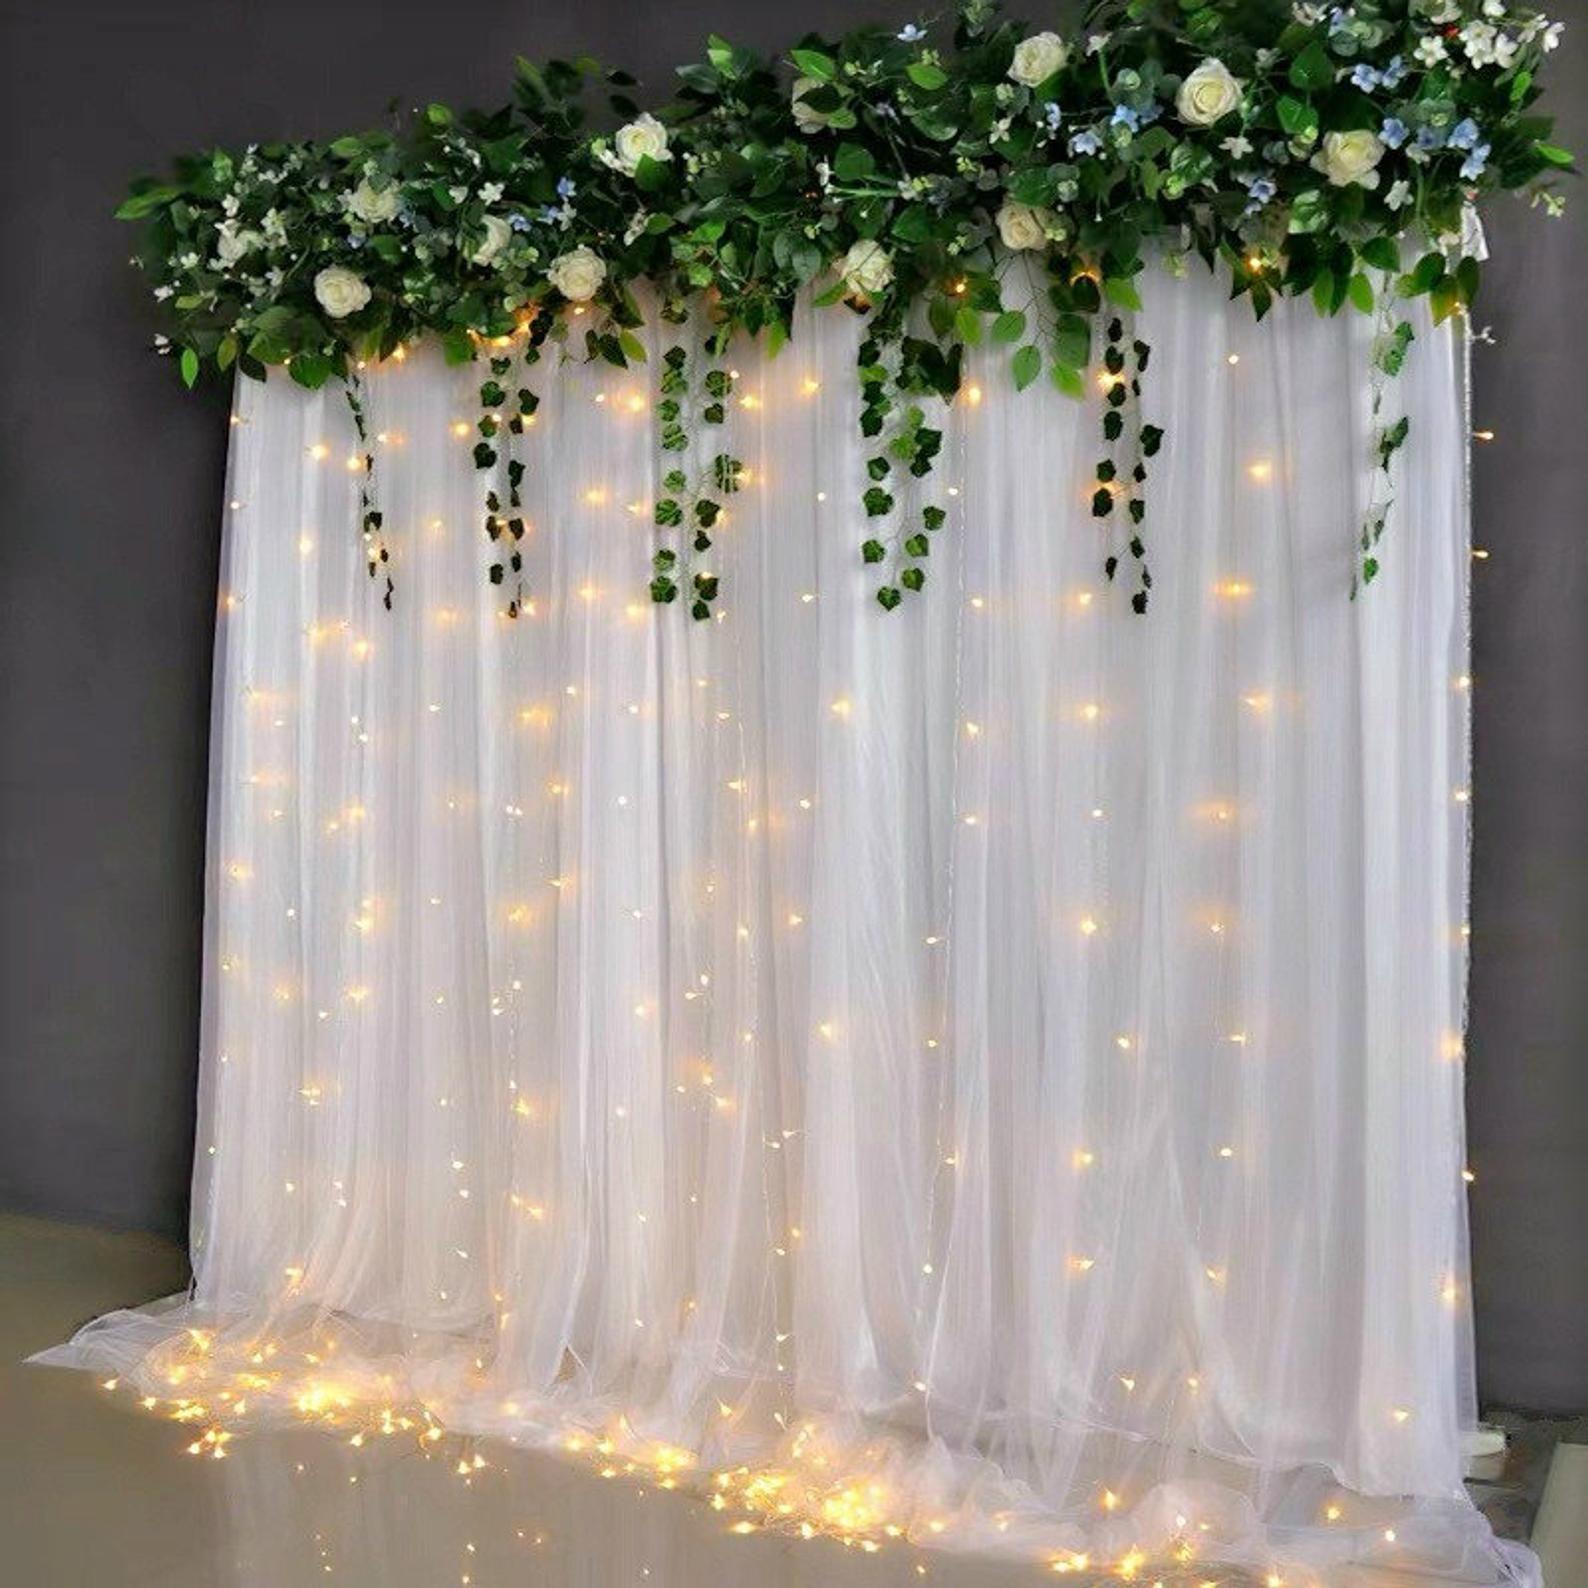 Window Curtain Lights,Fairy String Lights, Firefly Lights for Bedroom Decorations - If you say i do